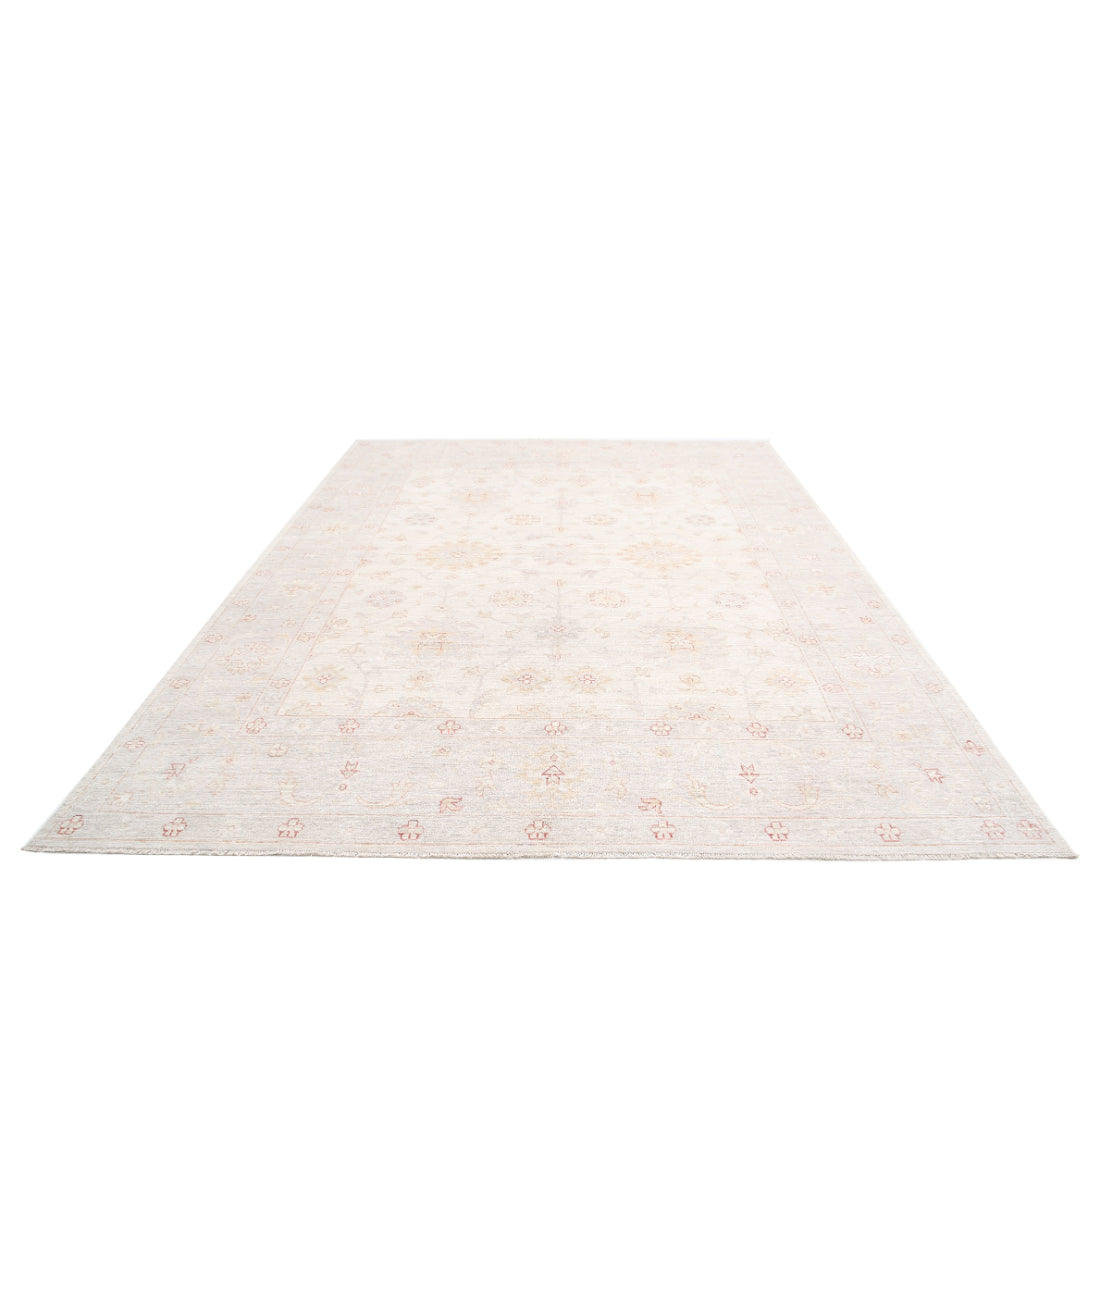 Hand Knotted Oushak Wool Rug - 8'10'' x 11'11'' 8'10'' x 11'11'' (265 X 358) / Ivory / Grey